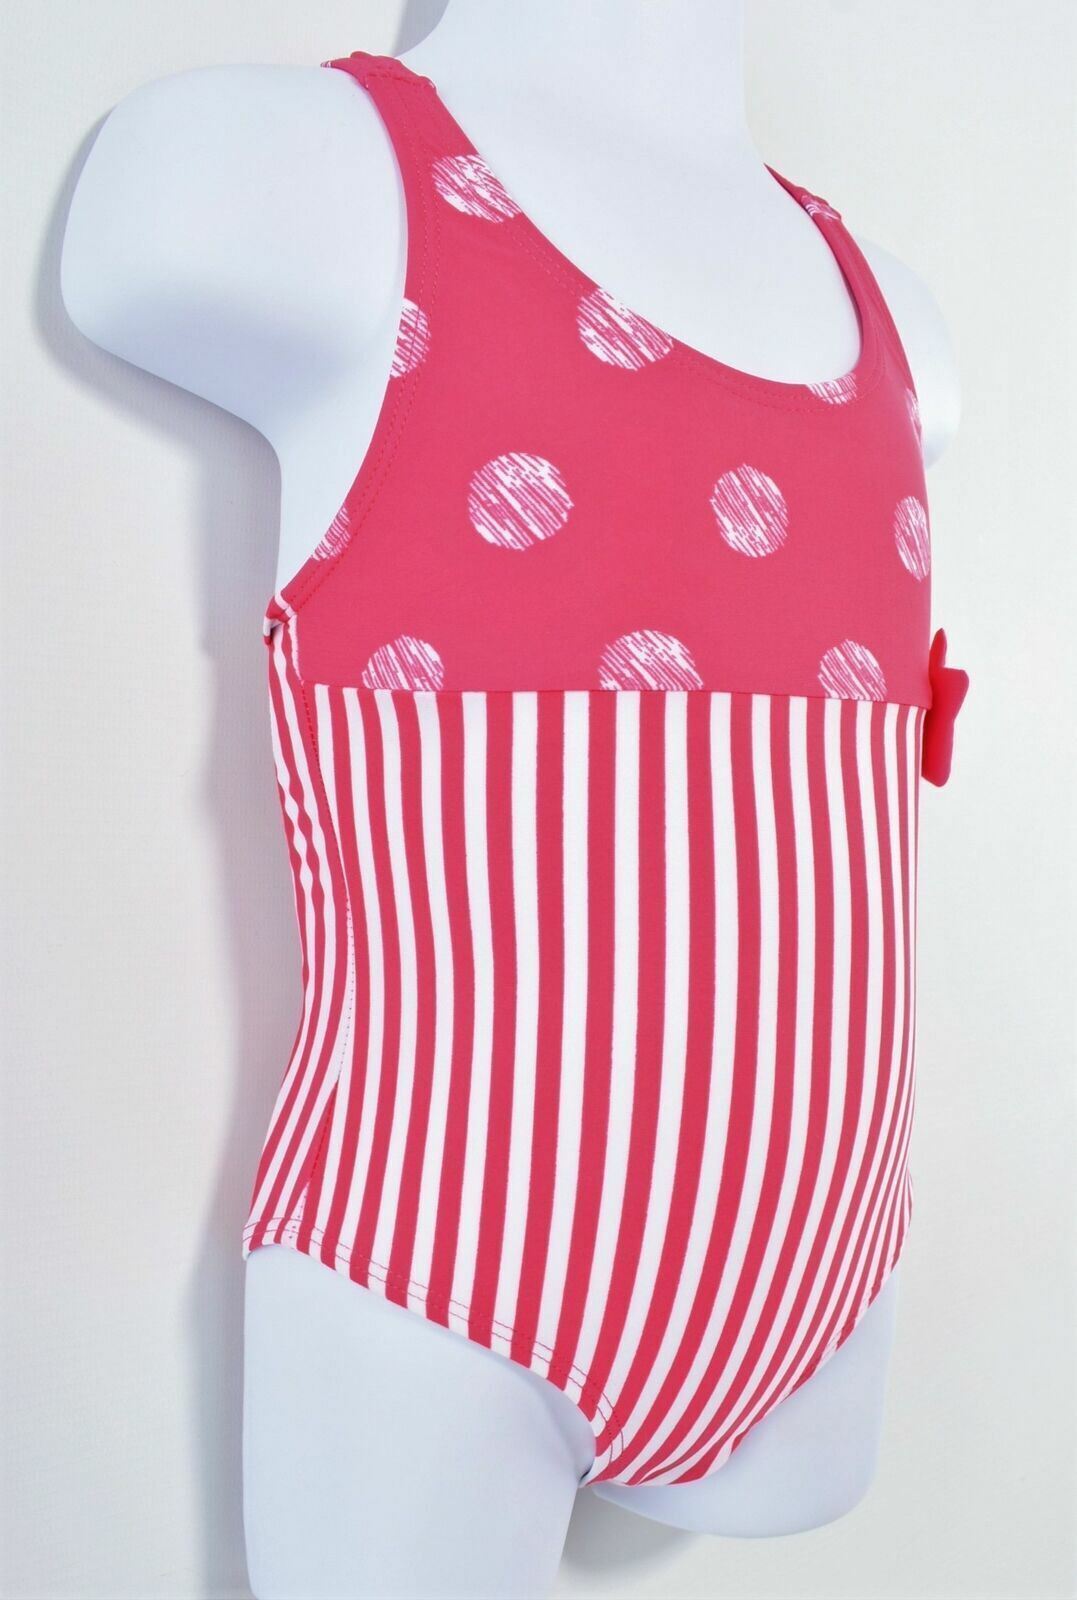 BELLYBUTTON Girls Pink/White Striped One Piece Swimsuit - 2 years to 3 years